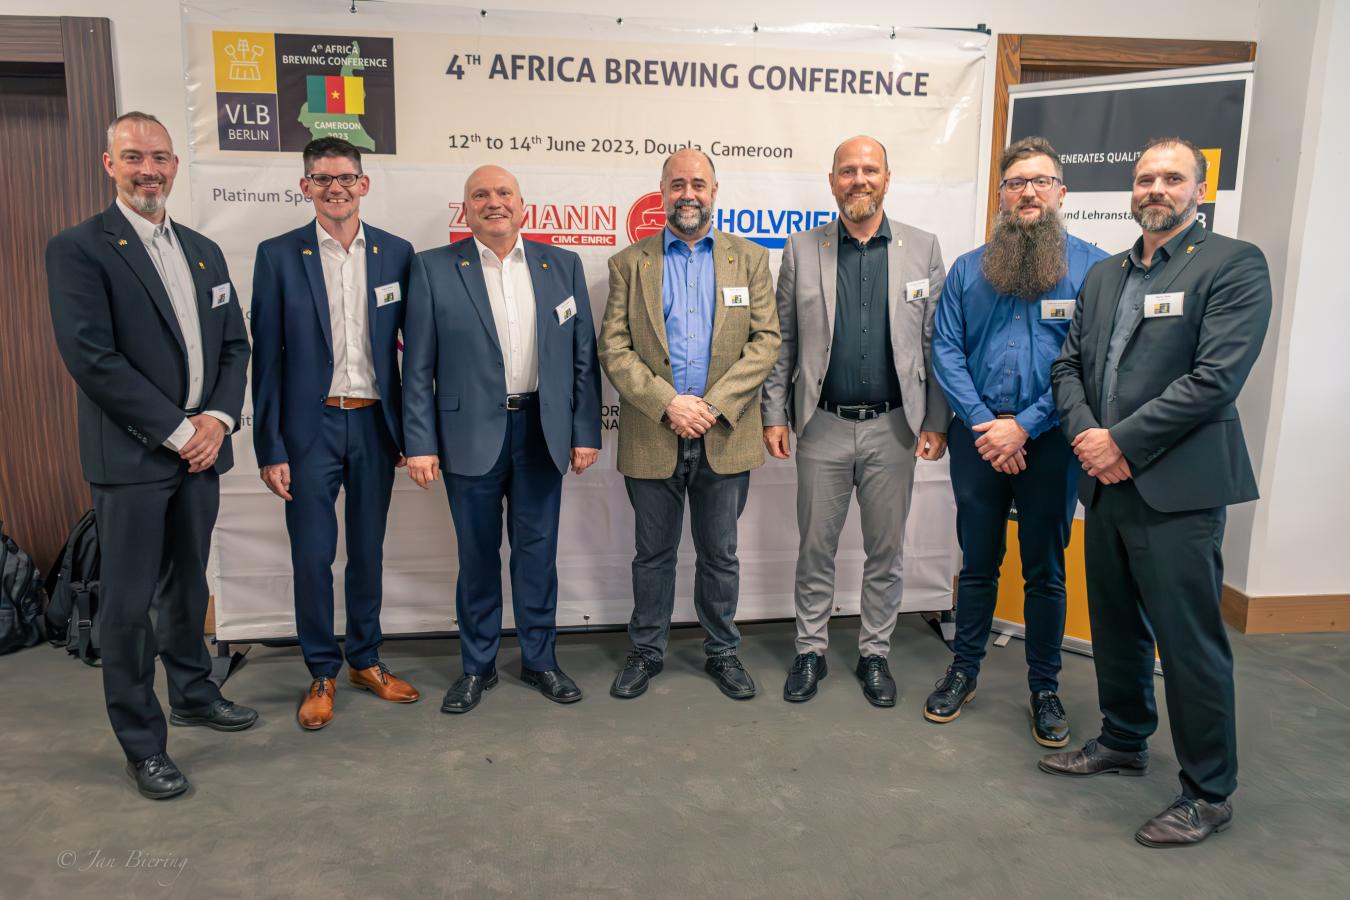 Impressions from the 4th Africa Brewing Conference